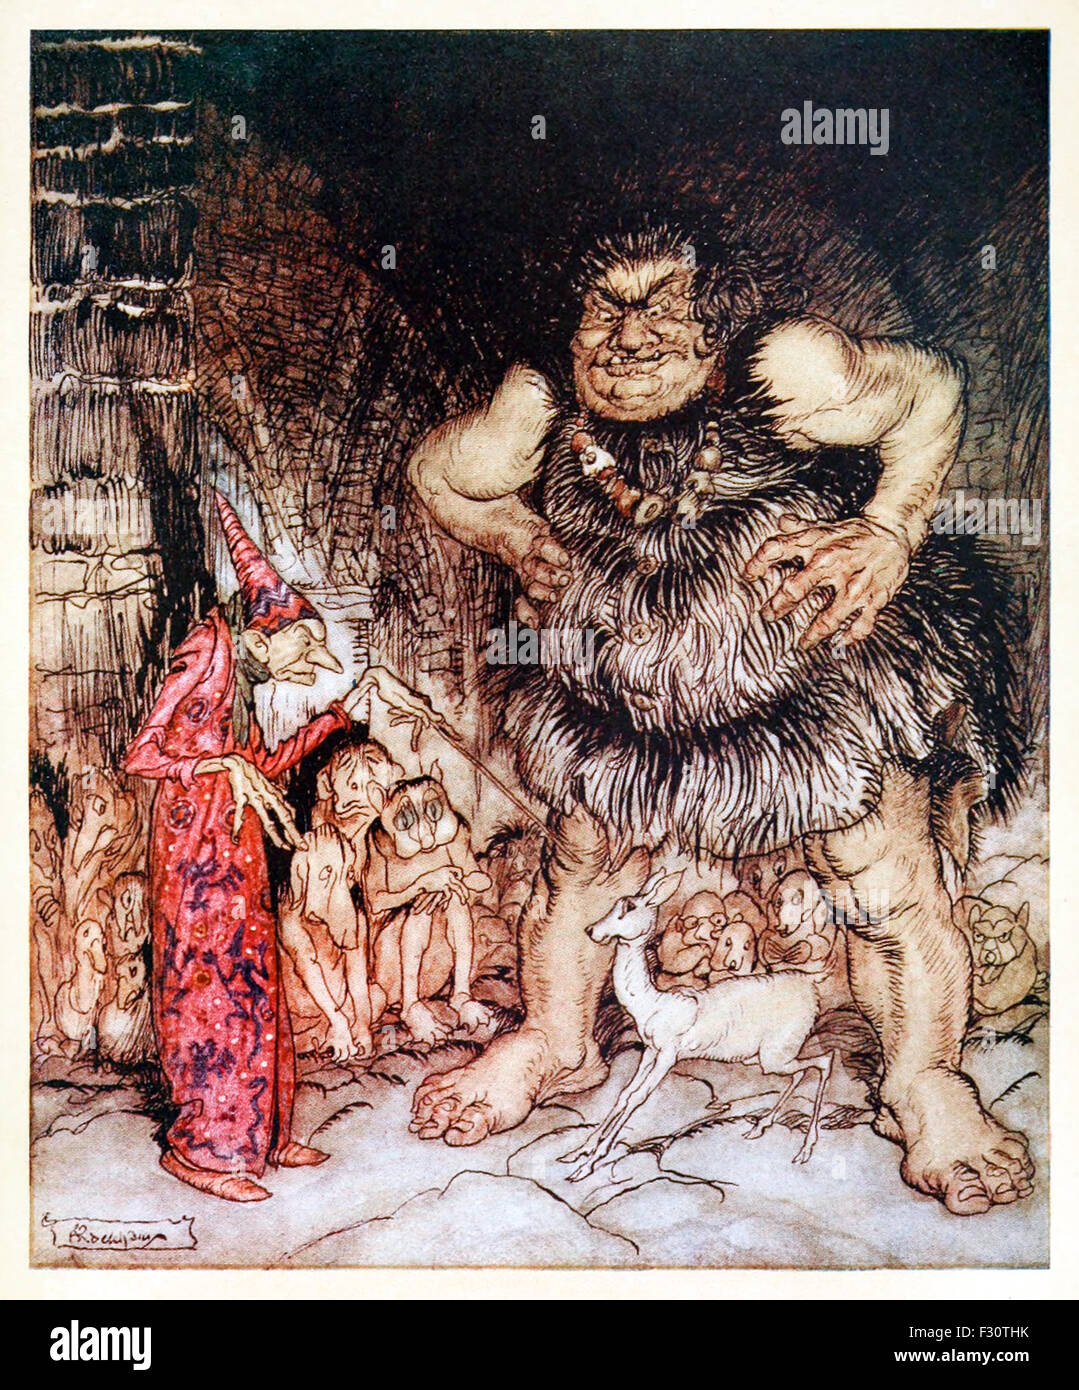 'The giant Galligantua and the wicked old magician transform the duke's daughter into a white hind' from 'Jack the Giant Killer' in 'English Fairy Tales', illustration by Arthur Rackham (1867-1939). See description for more information. Stock Photo